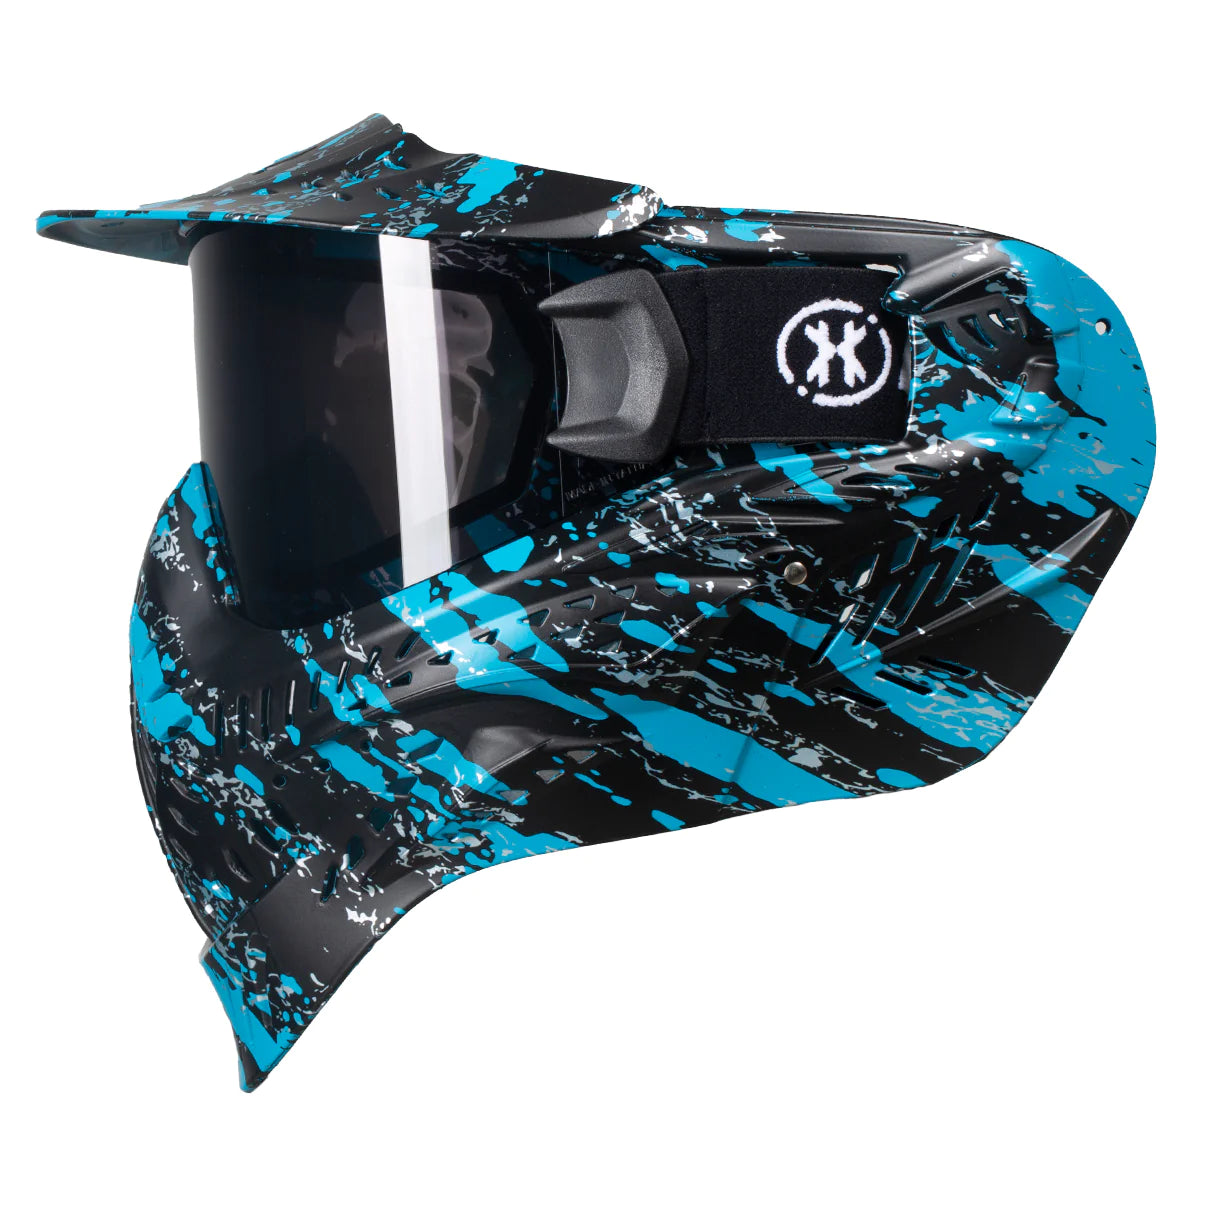 HSTL Goggle | Fracture Black/Torquoise | Paintball & Airsoft Goggle